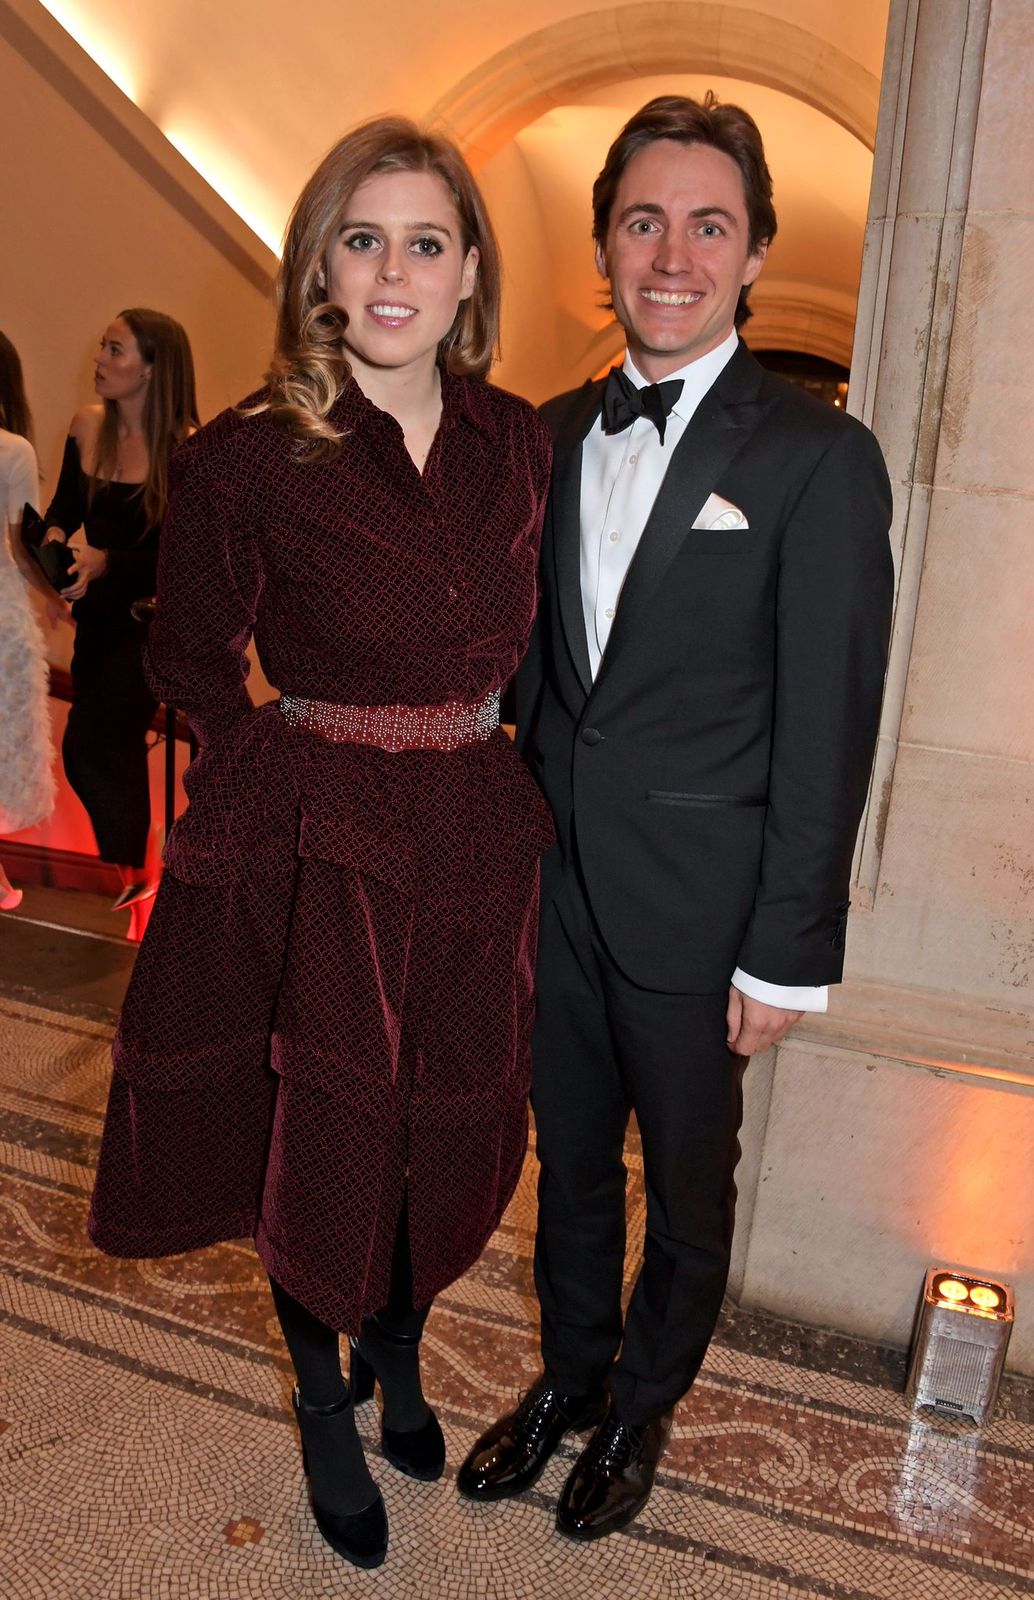 Princess Beatrice and Edoardo Mapelli Mozzi at The Portrait Gala held at the National Portrait Gallery on March 12, 2019, in London, England | Photo: Getty Images